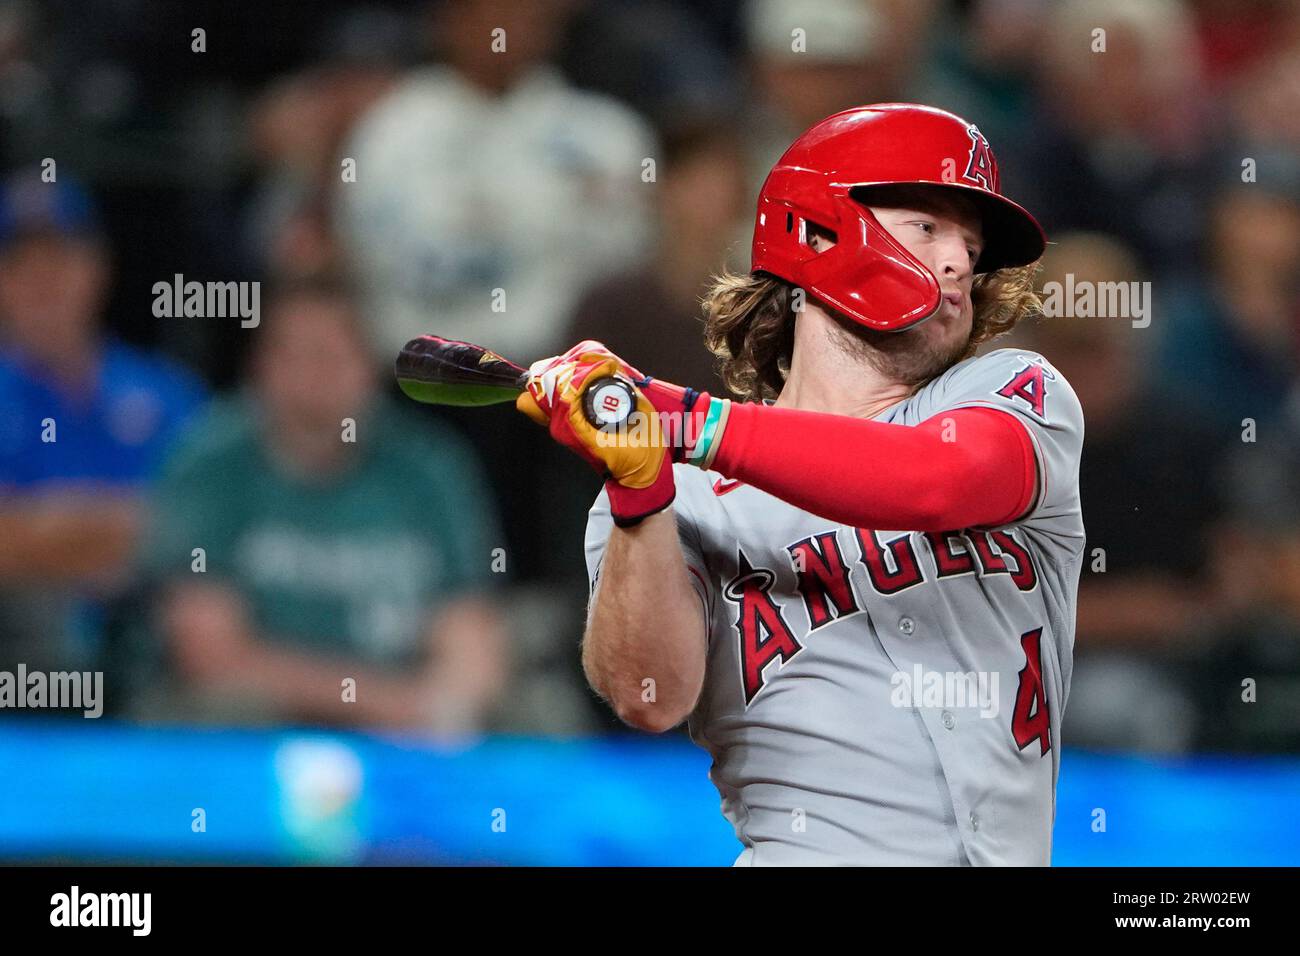 Los Angeles Angels' Brett Phillips (8) warms up before a spring training  baseball game against the San Francisco Giants in Scottsdale, Ariz.,  Sunday, March 19, 2023. (AP Photo/Ashley Landis Stock Photo - Alamy